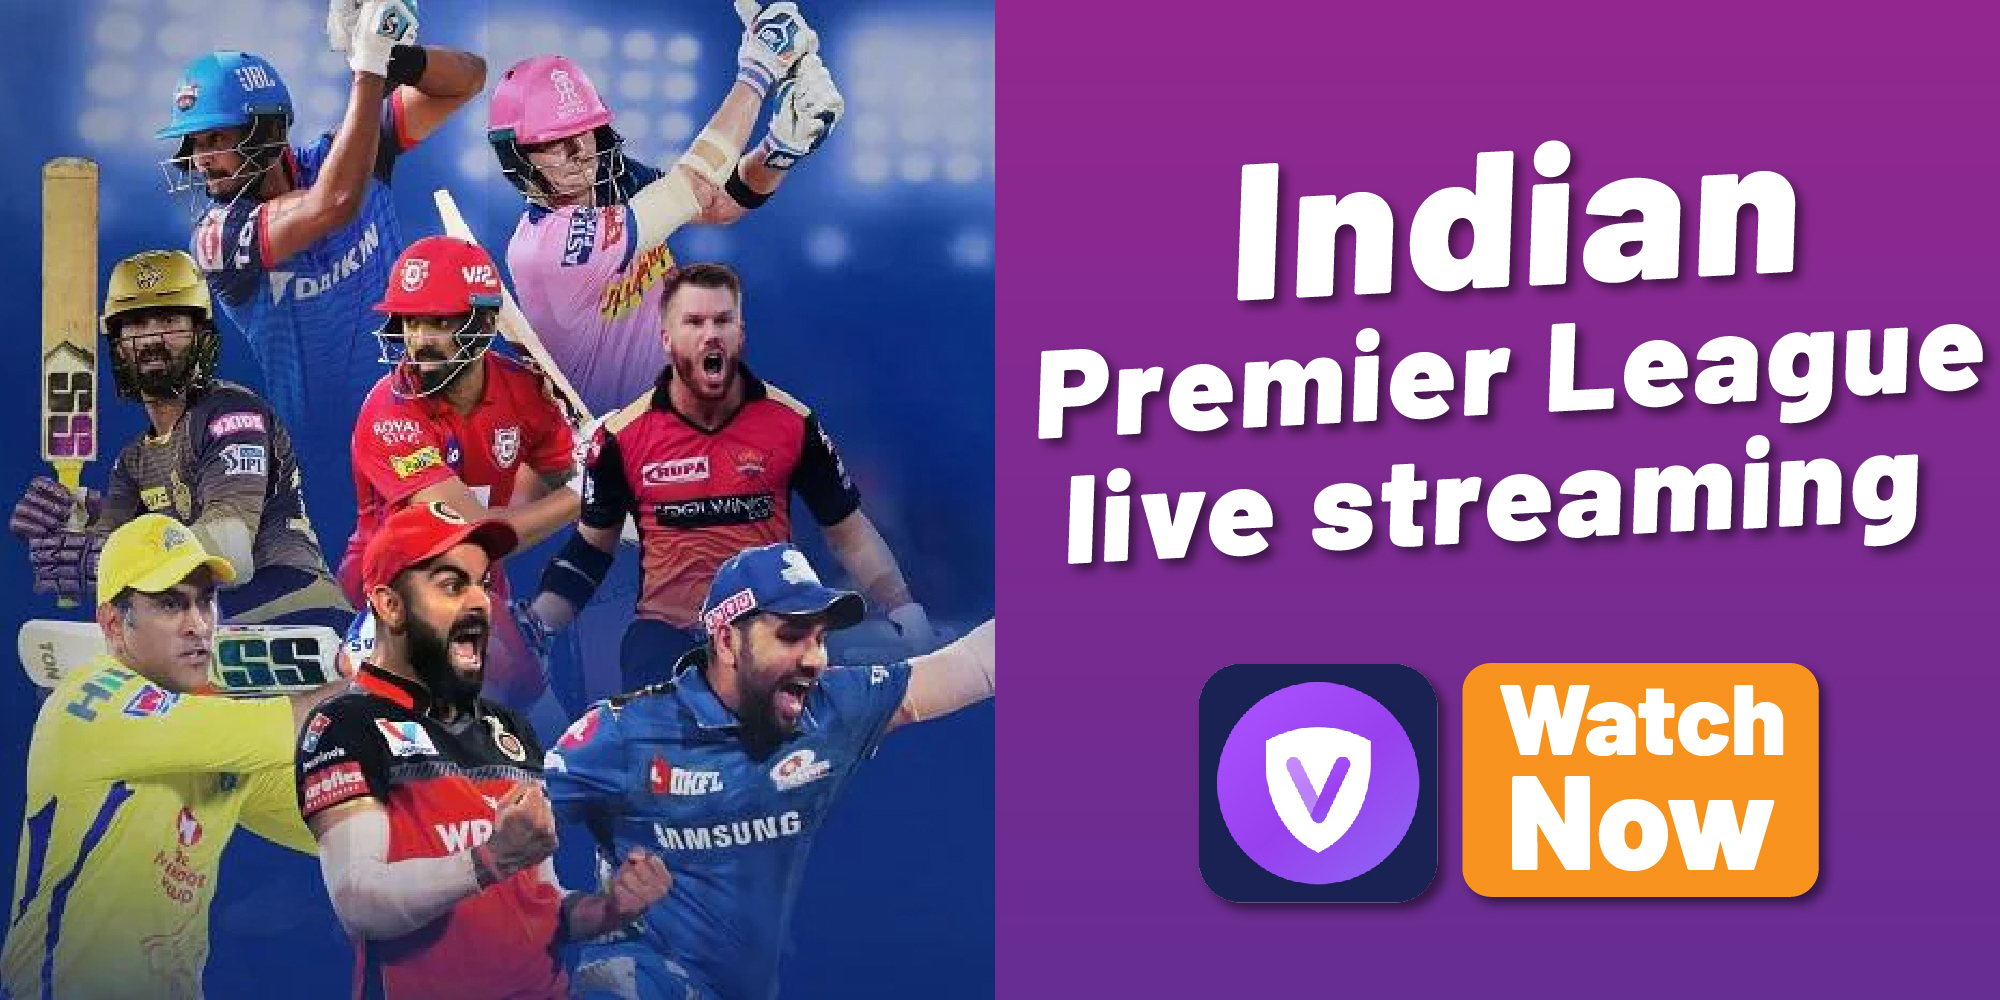 How to watch IPL live streaming in 2022? Hello VPN Blog